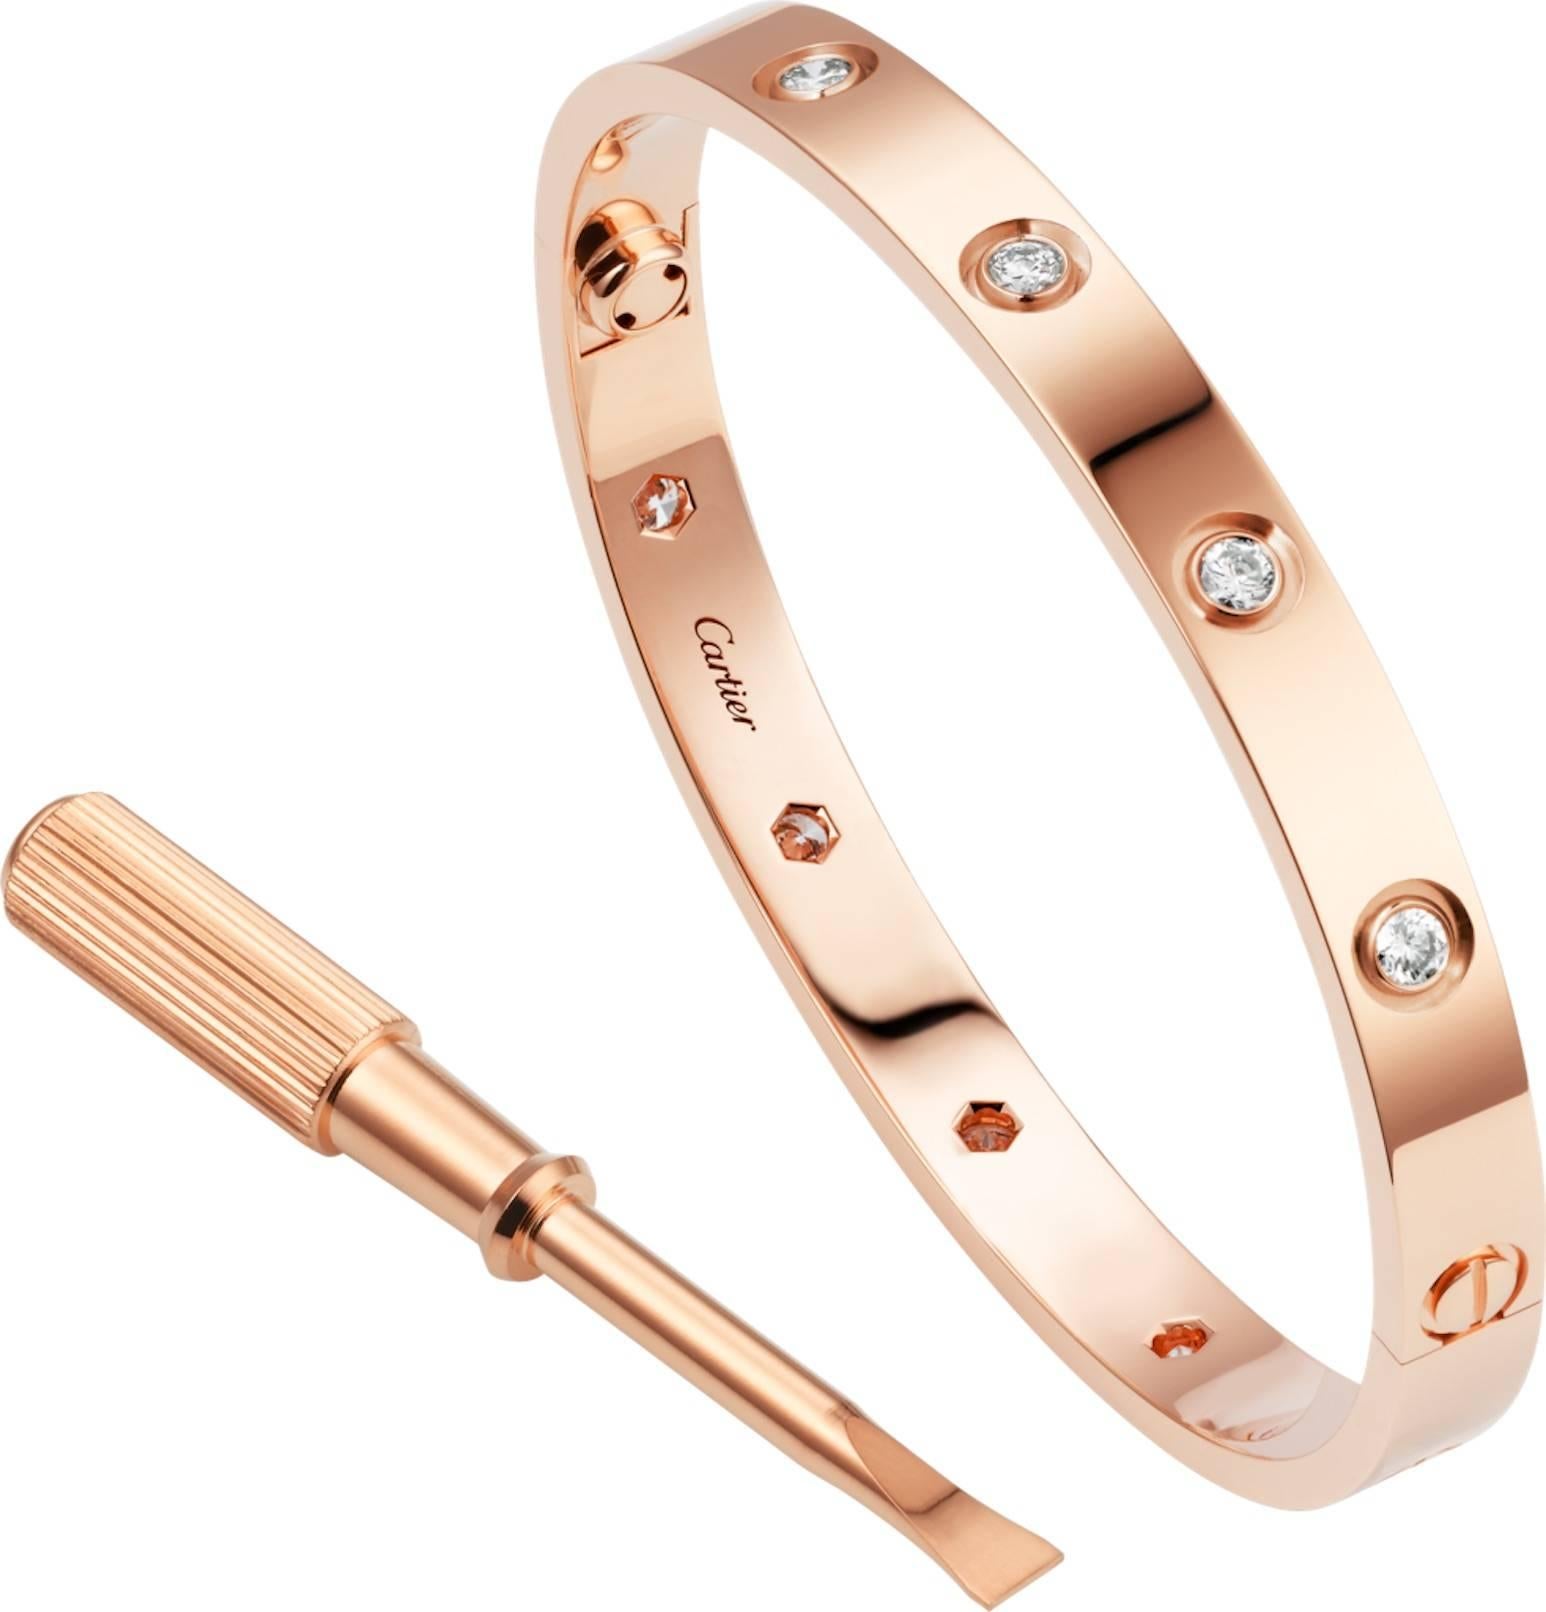 A Must-Have! The beautiful Love bracelets designed by Cartier turn a promise into a commitment.

The Love Bracelet in Pink Gold 750 18k is set by 10 round cut diamonds (Total approximately 0.96 carat). 
It is proposed with the identical model in